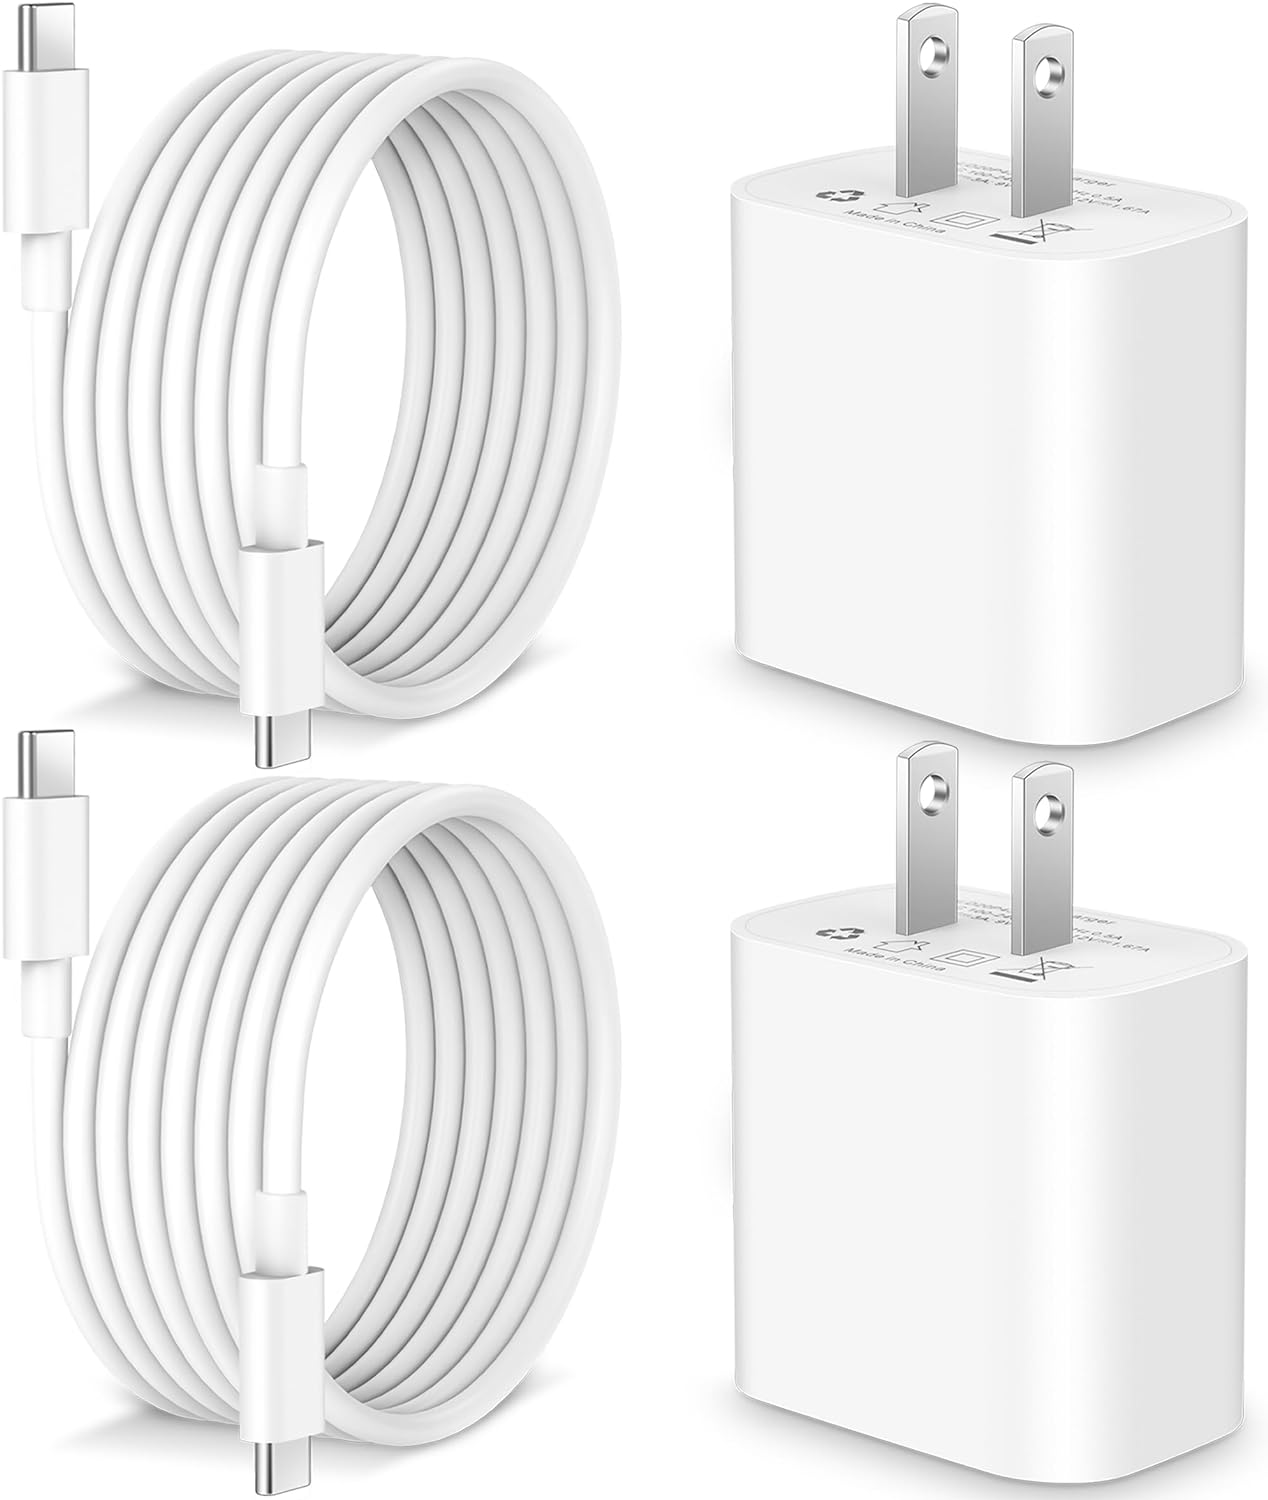 iPhone 15 Charger, iPad Pro Fast Charger [Apple Certified], 2Pack 20W PD USB C Fast Charger Block for iPad Air 5th/4th, iPad Pro 12.9/11 inch, iPad 10th, iPhone 15 Pro Max/Plus, with 6FT USB C Cable